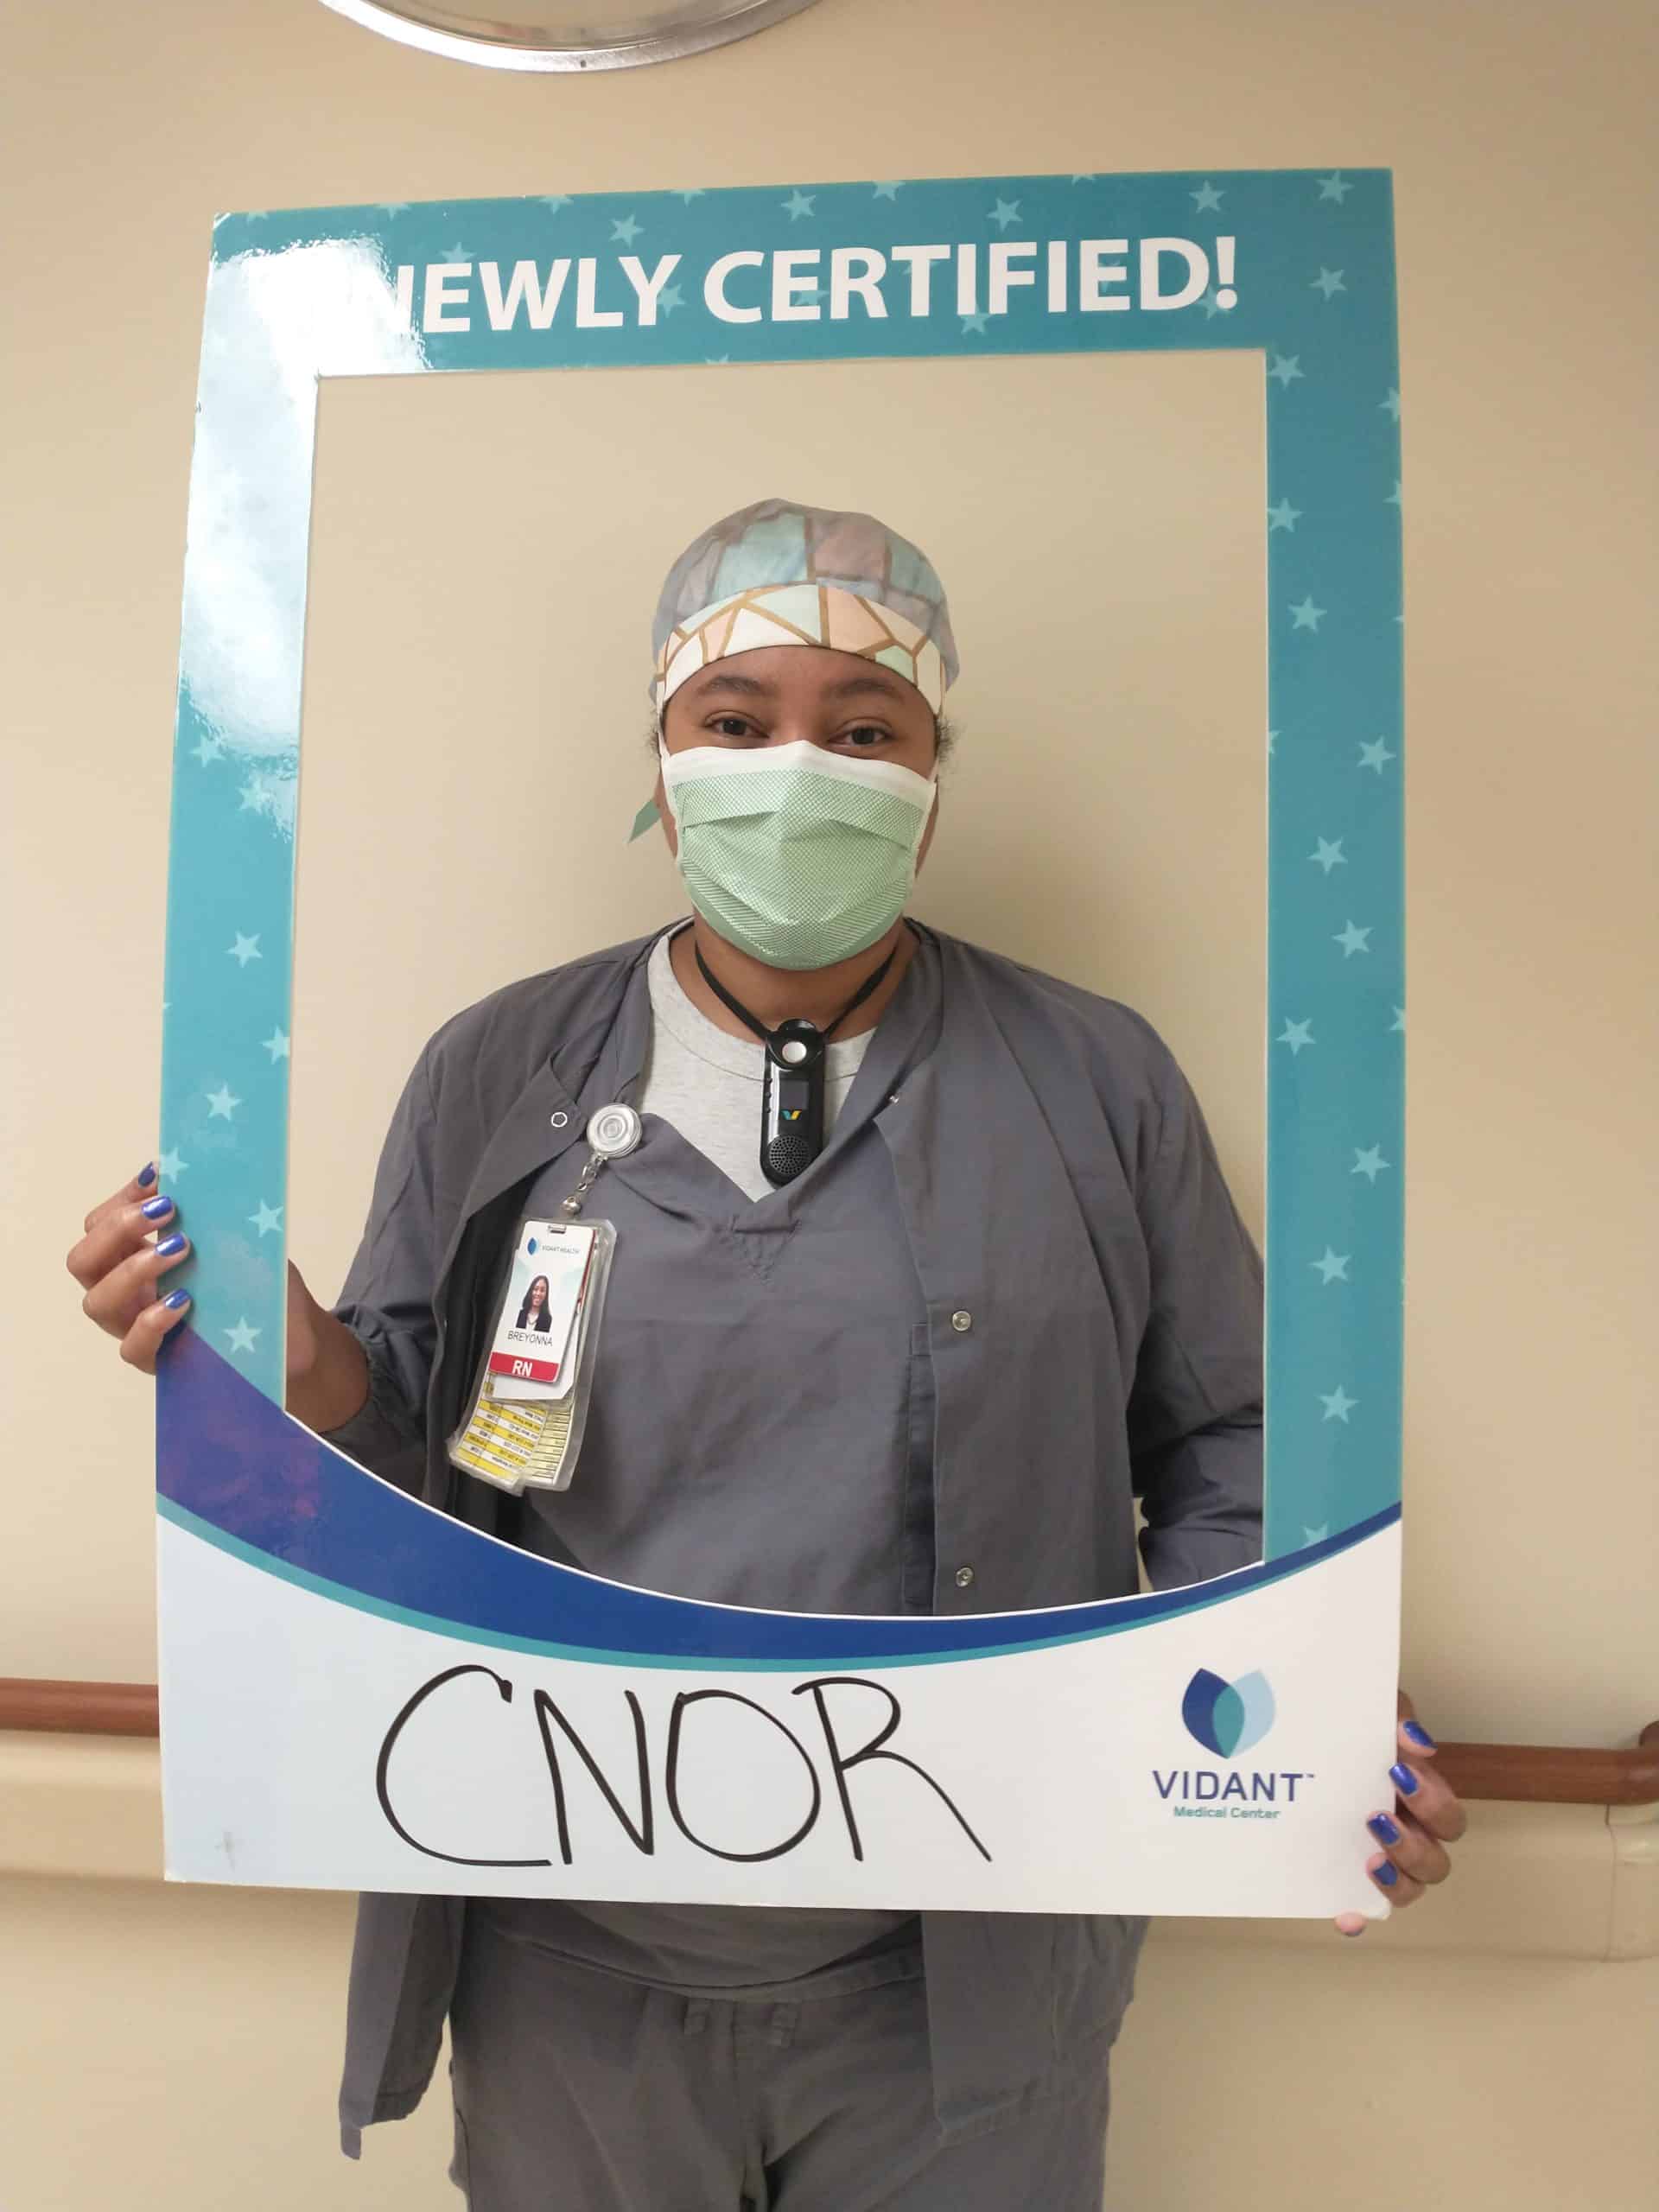 Breyonna Brown, BSN, RN, CNOR, works in the operating room and received her certified nurse of OR certification